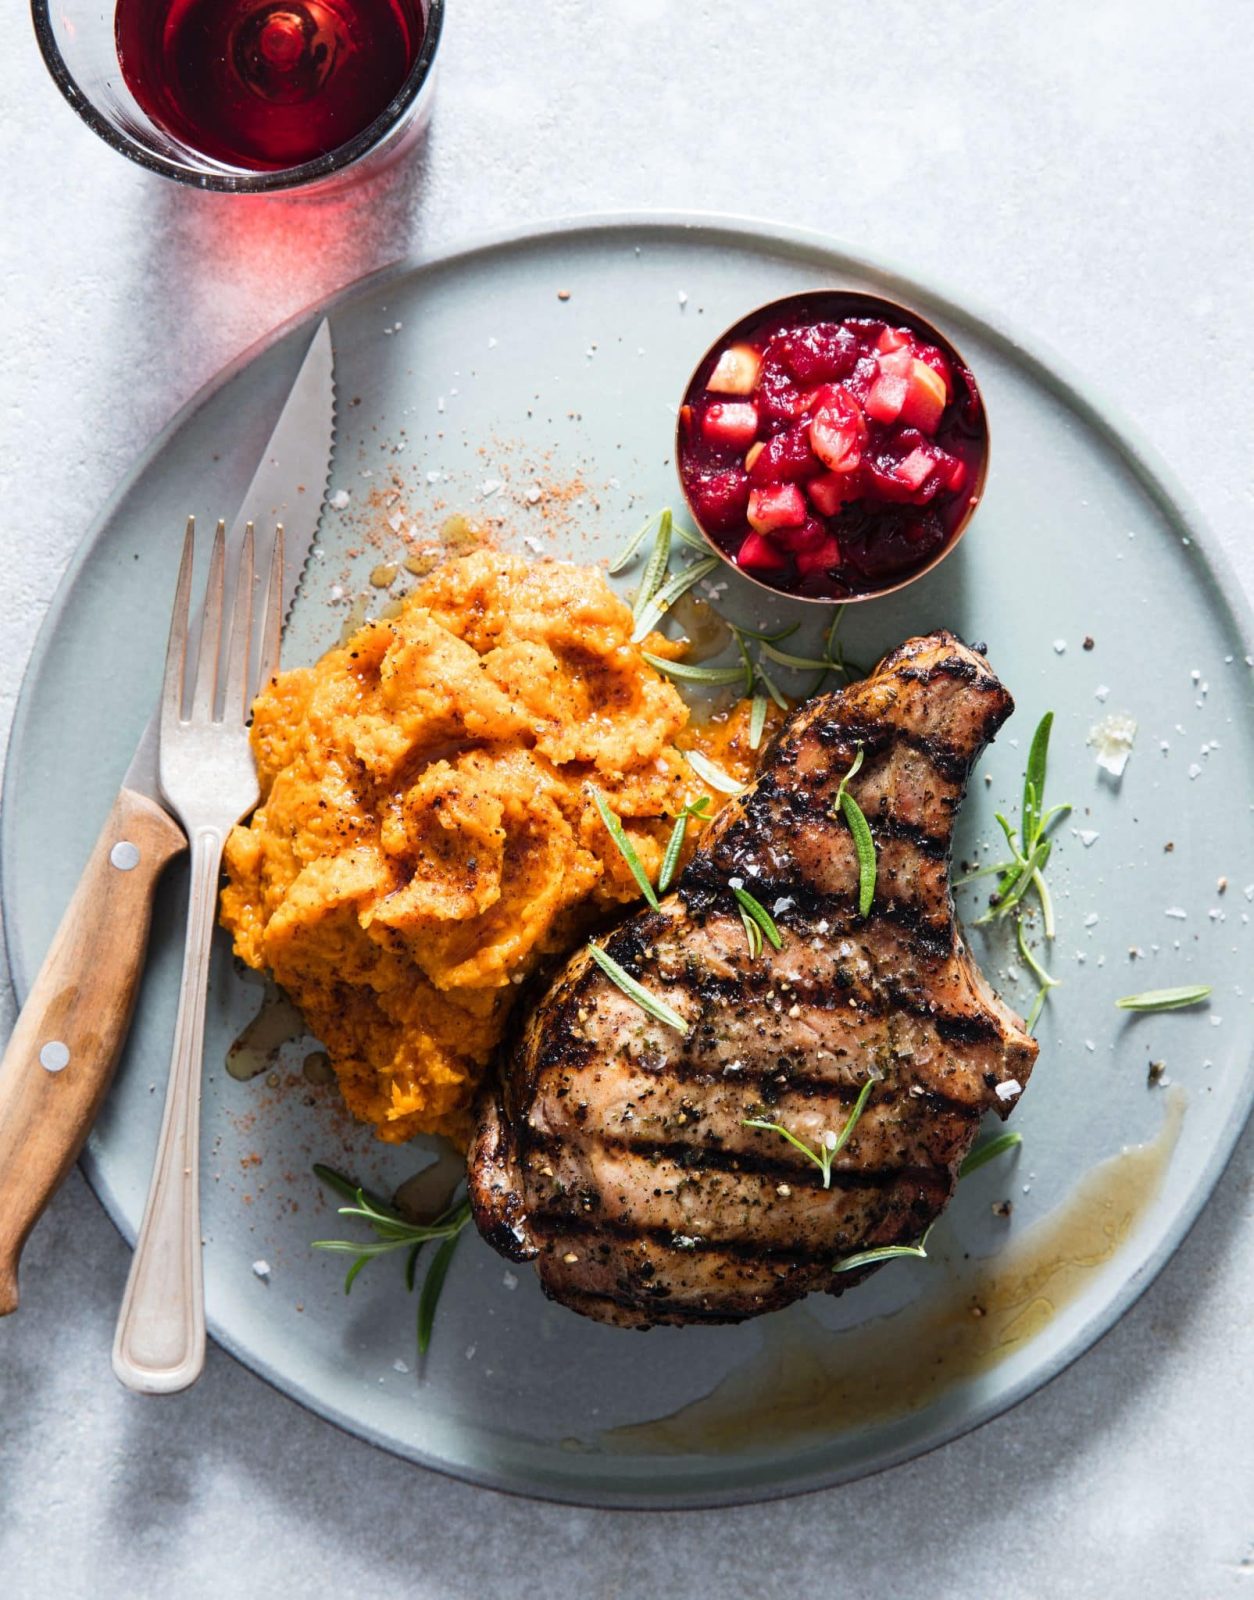 PORK CHOPS with Mashed Sweet Potatoes and Cranberry Sauce